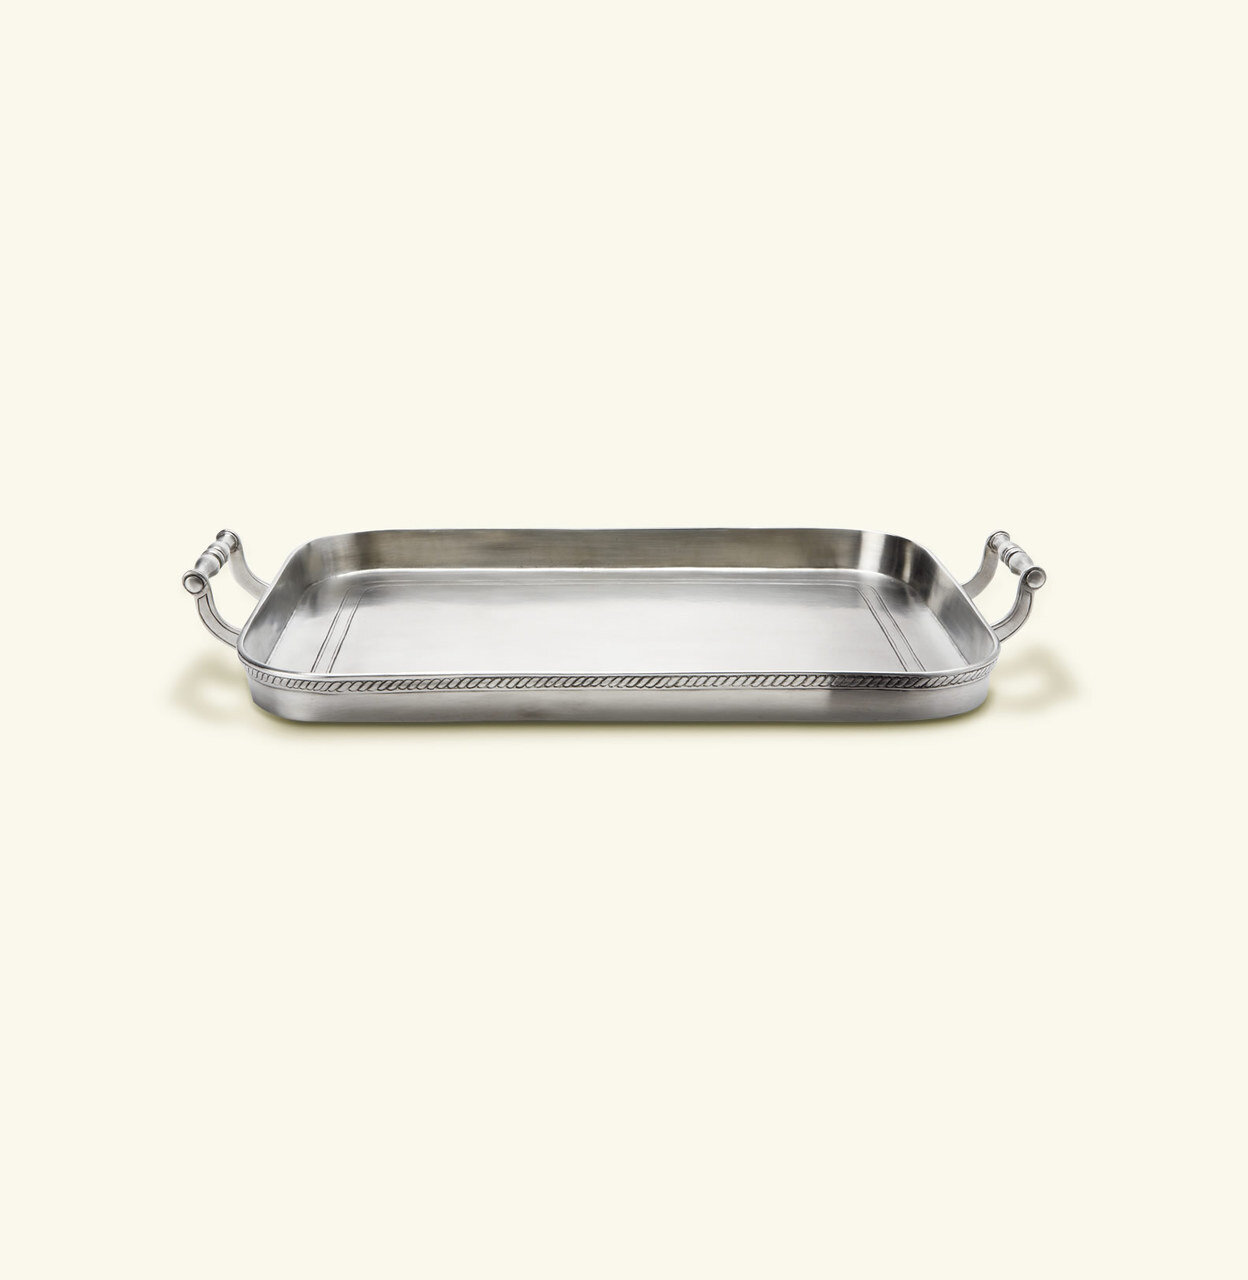 Match Pewter Gallery Tray With Handles Medium a798.0